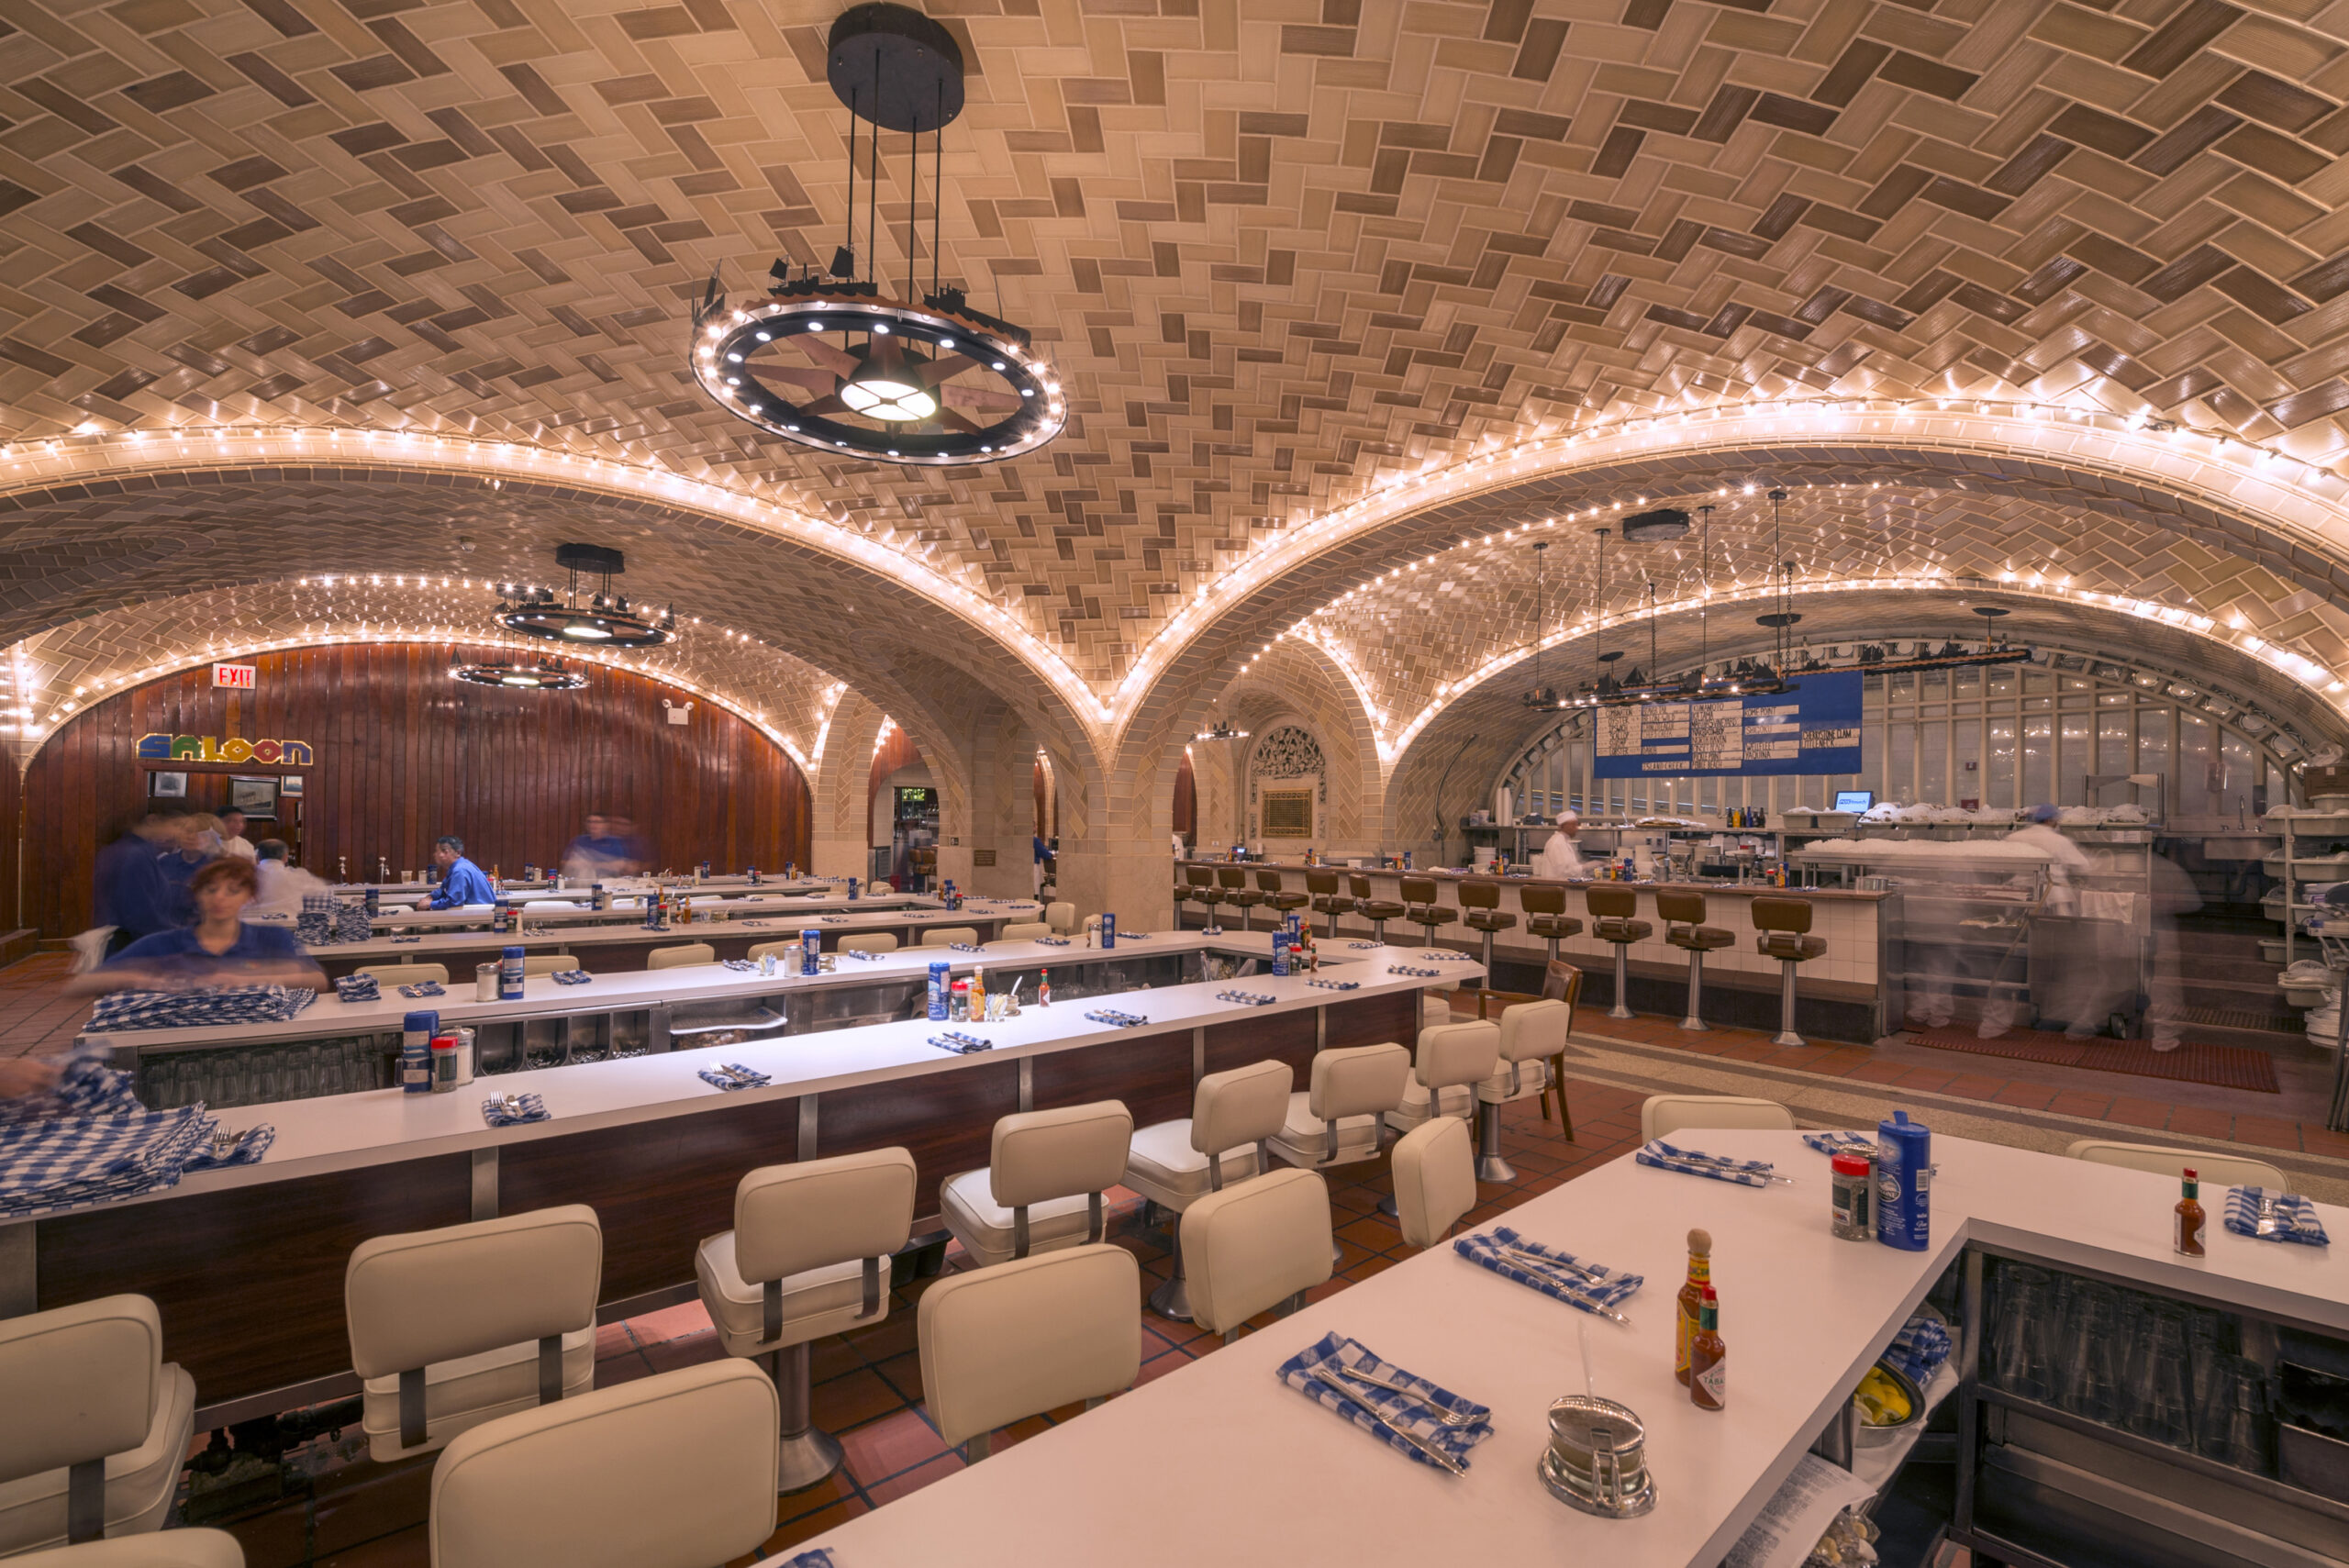 The Oyster Bar Restaurant at Grand Central Terminal - Graciano